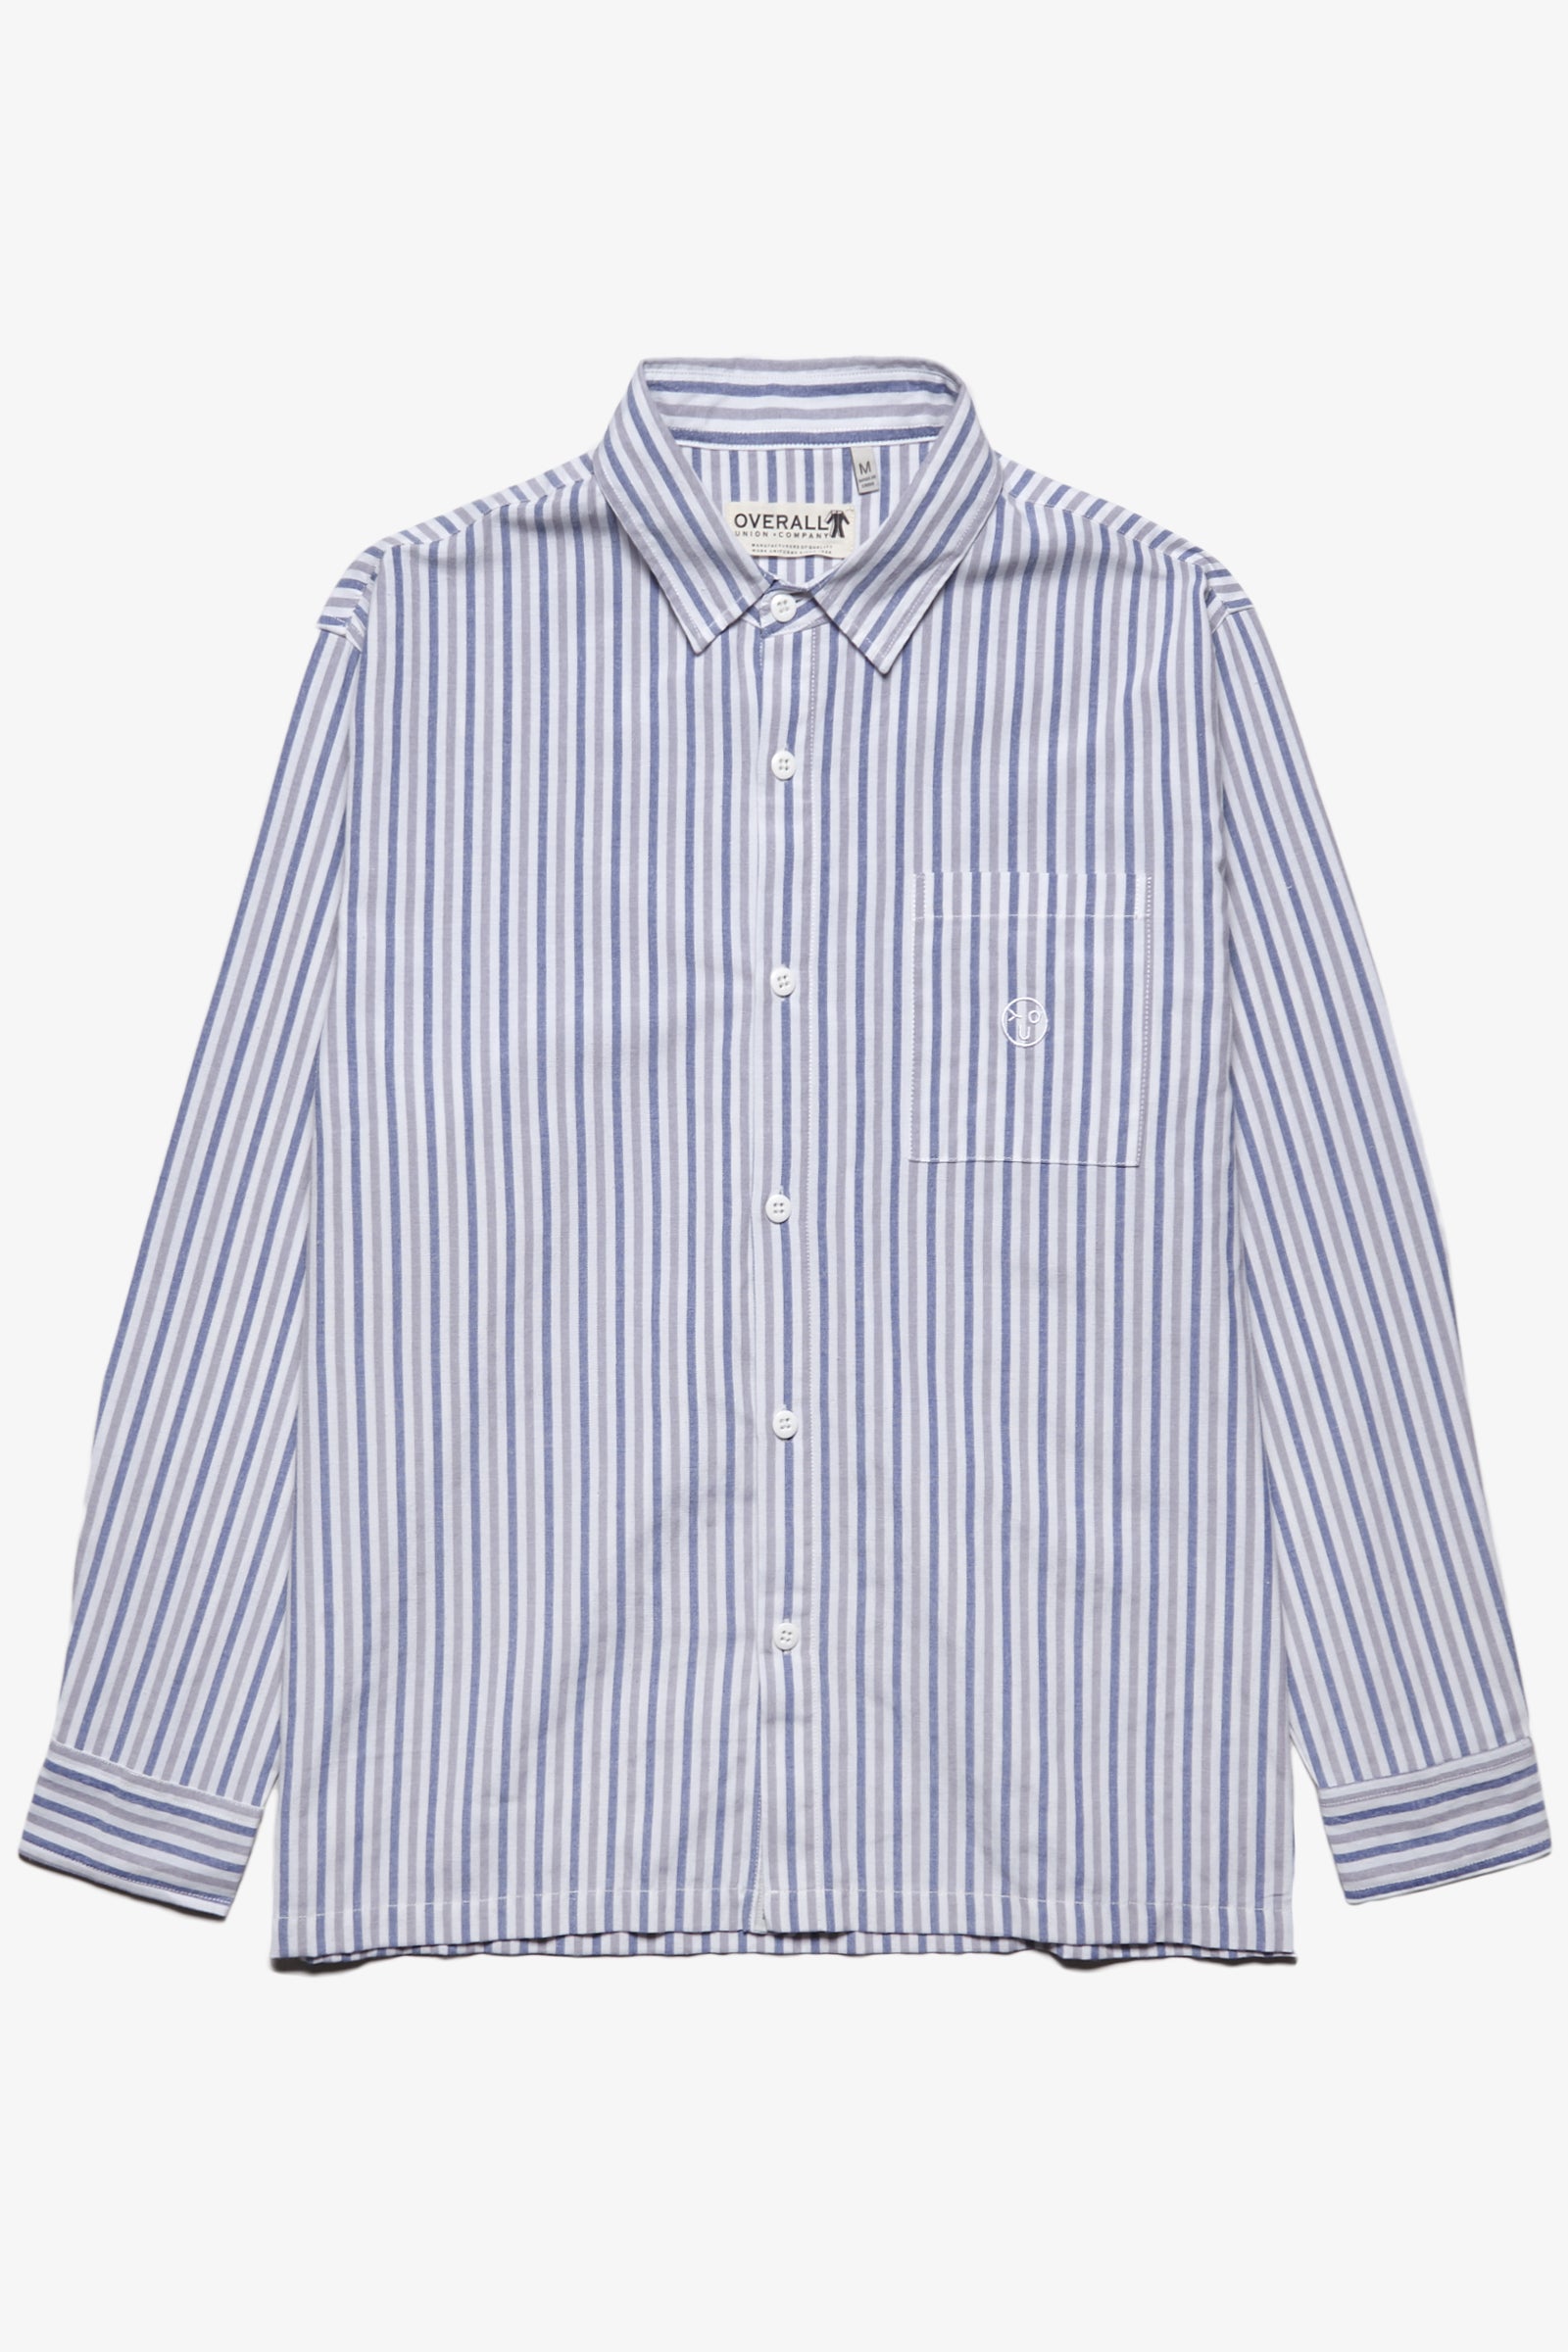 Overall Union - Box Button Down Shirt - Grey